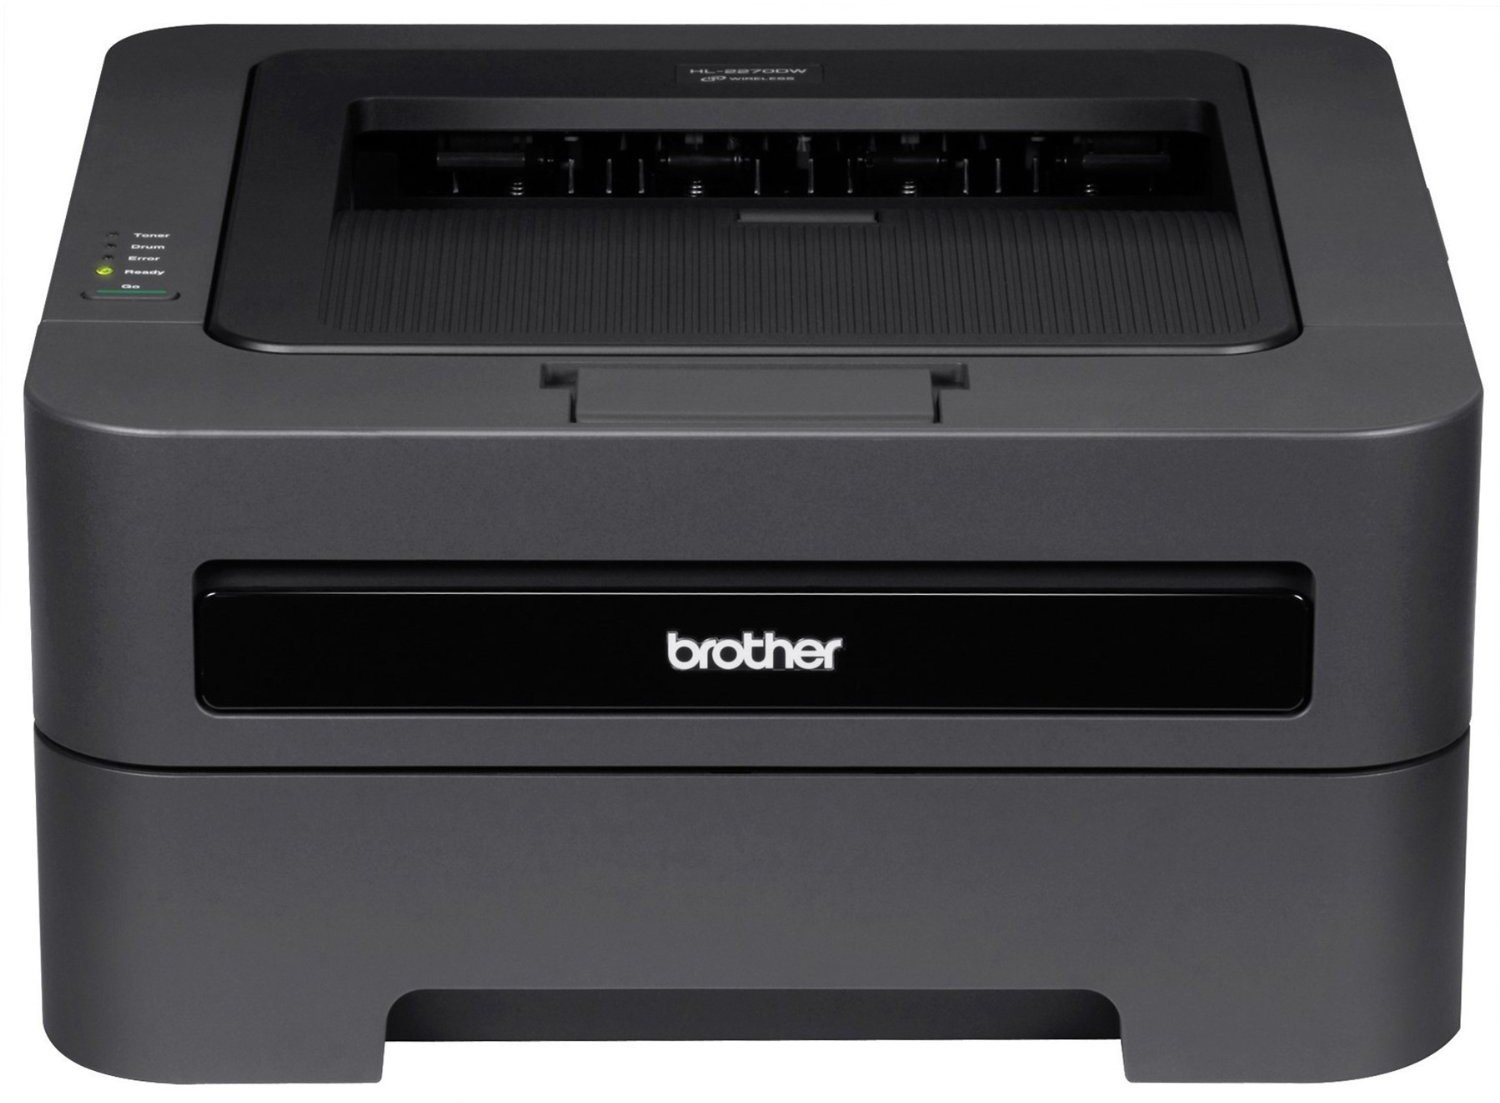 Best home printers for 2018